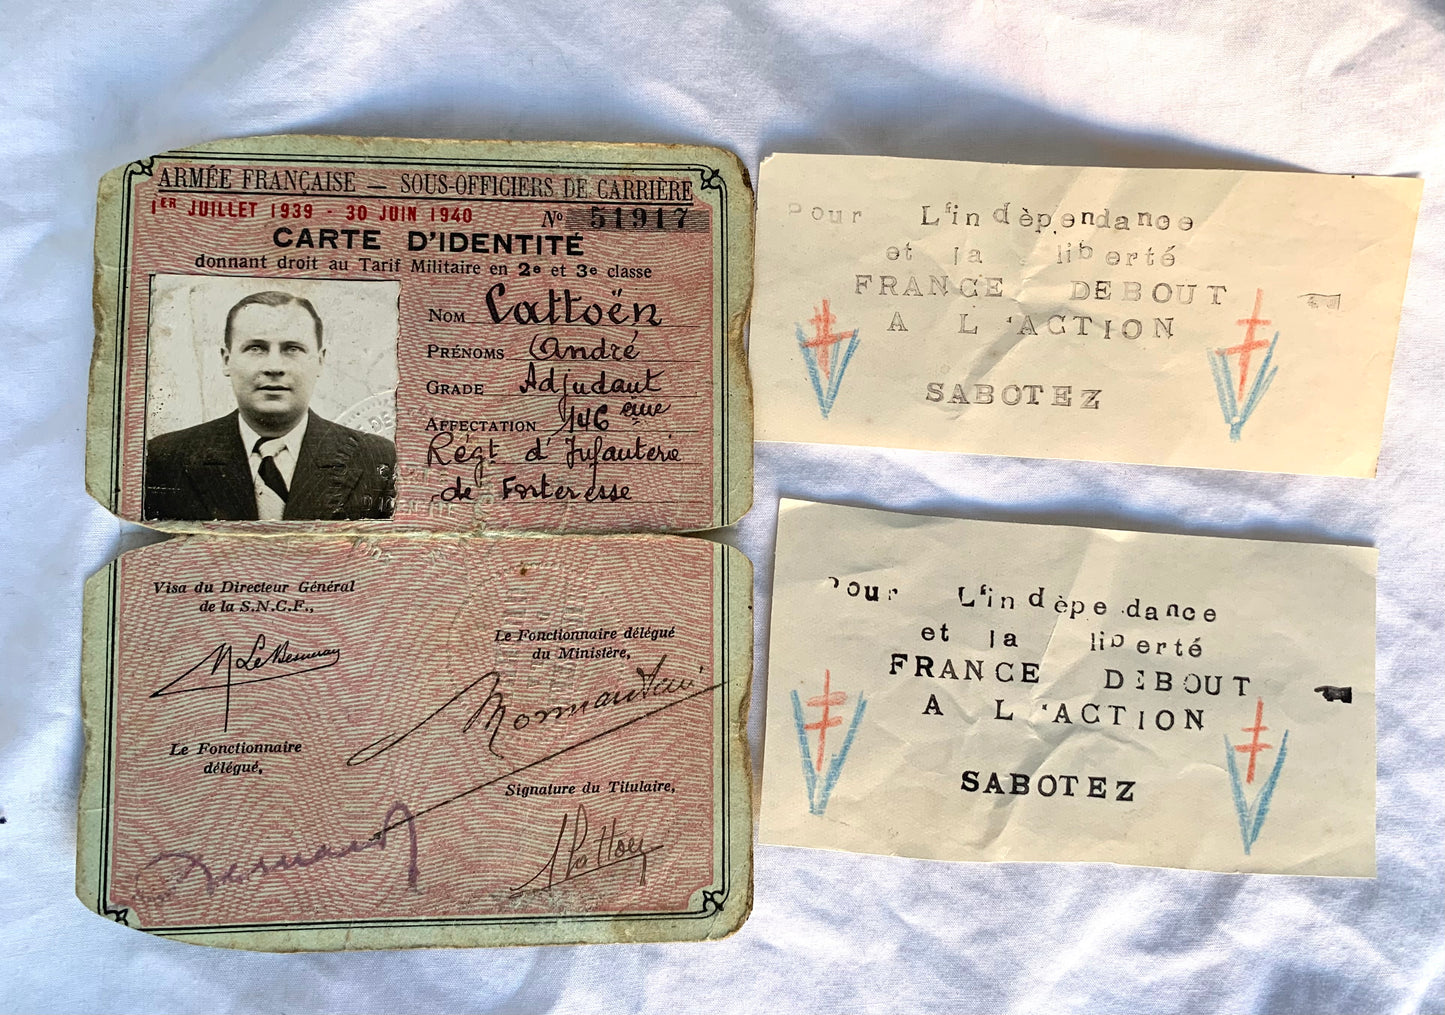 A Stunning FFI/Resistance Grouping to Andre Cattoen including Fighting Knife, coded newspaper, ID Cards, FFI Flag and much more.